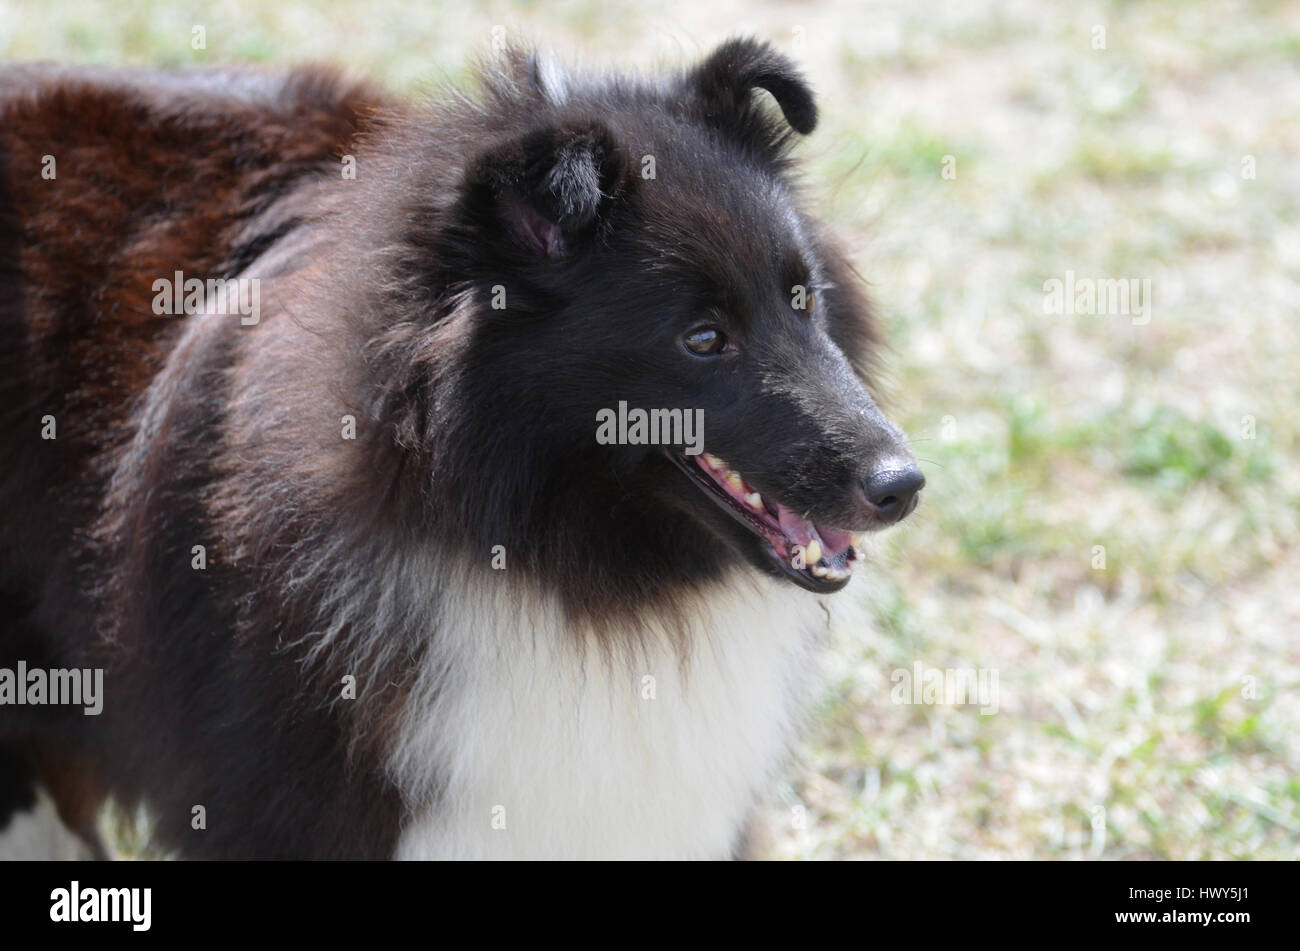 Adorable face of a black and white sheltie dog. Stock Photo